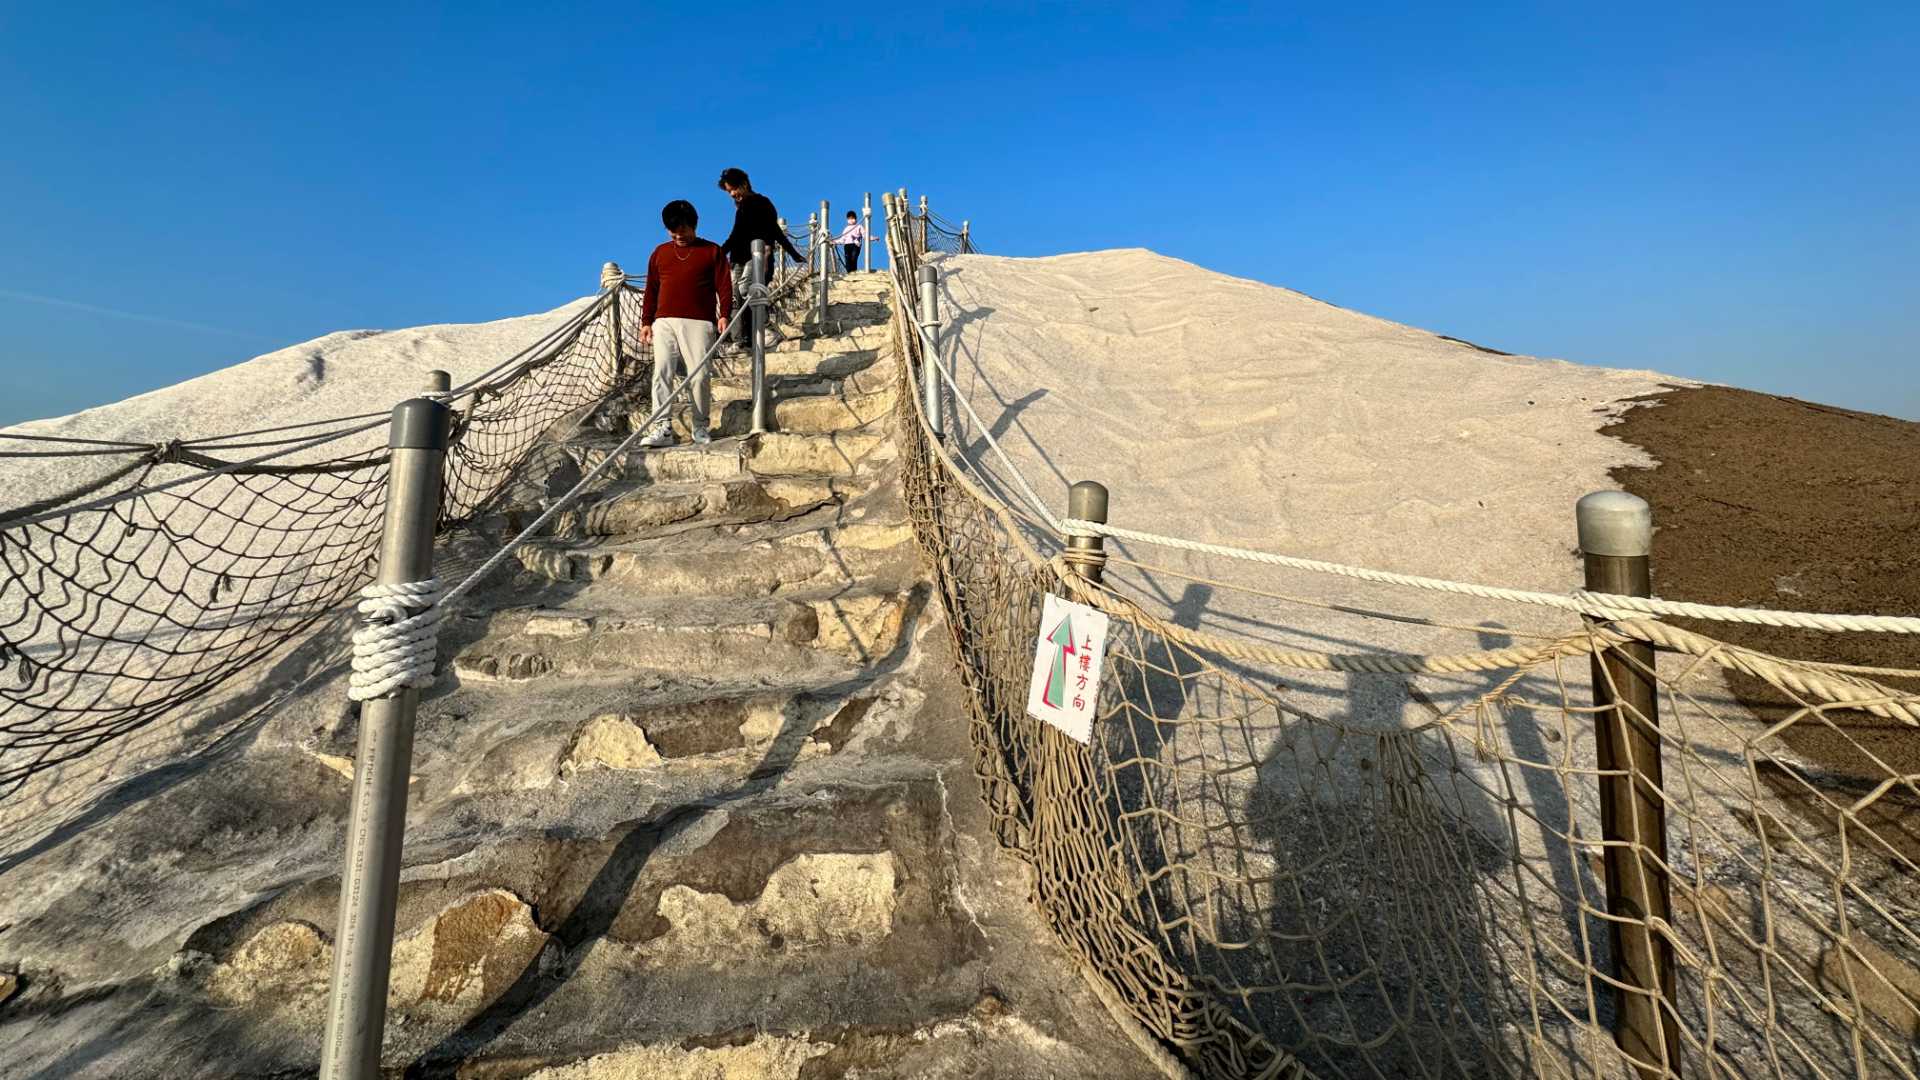 Steps carved into Qigu salt mountain with people carefully descending.